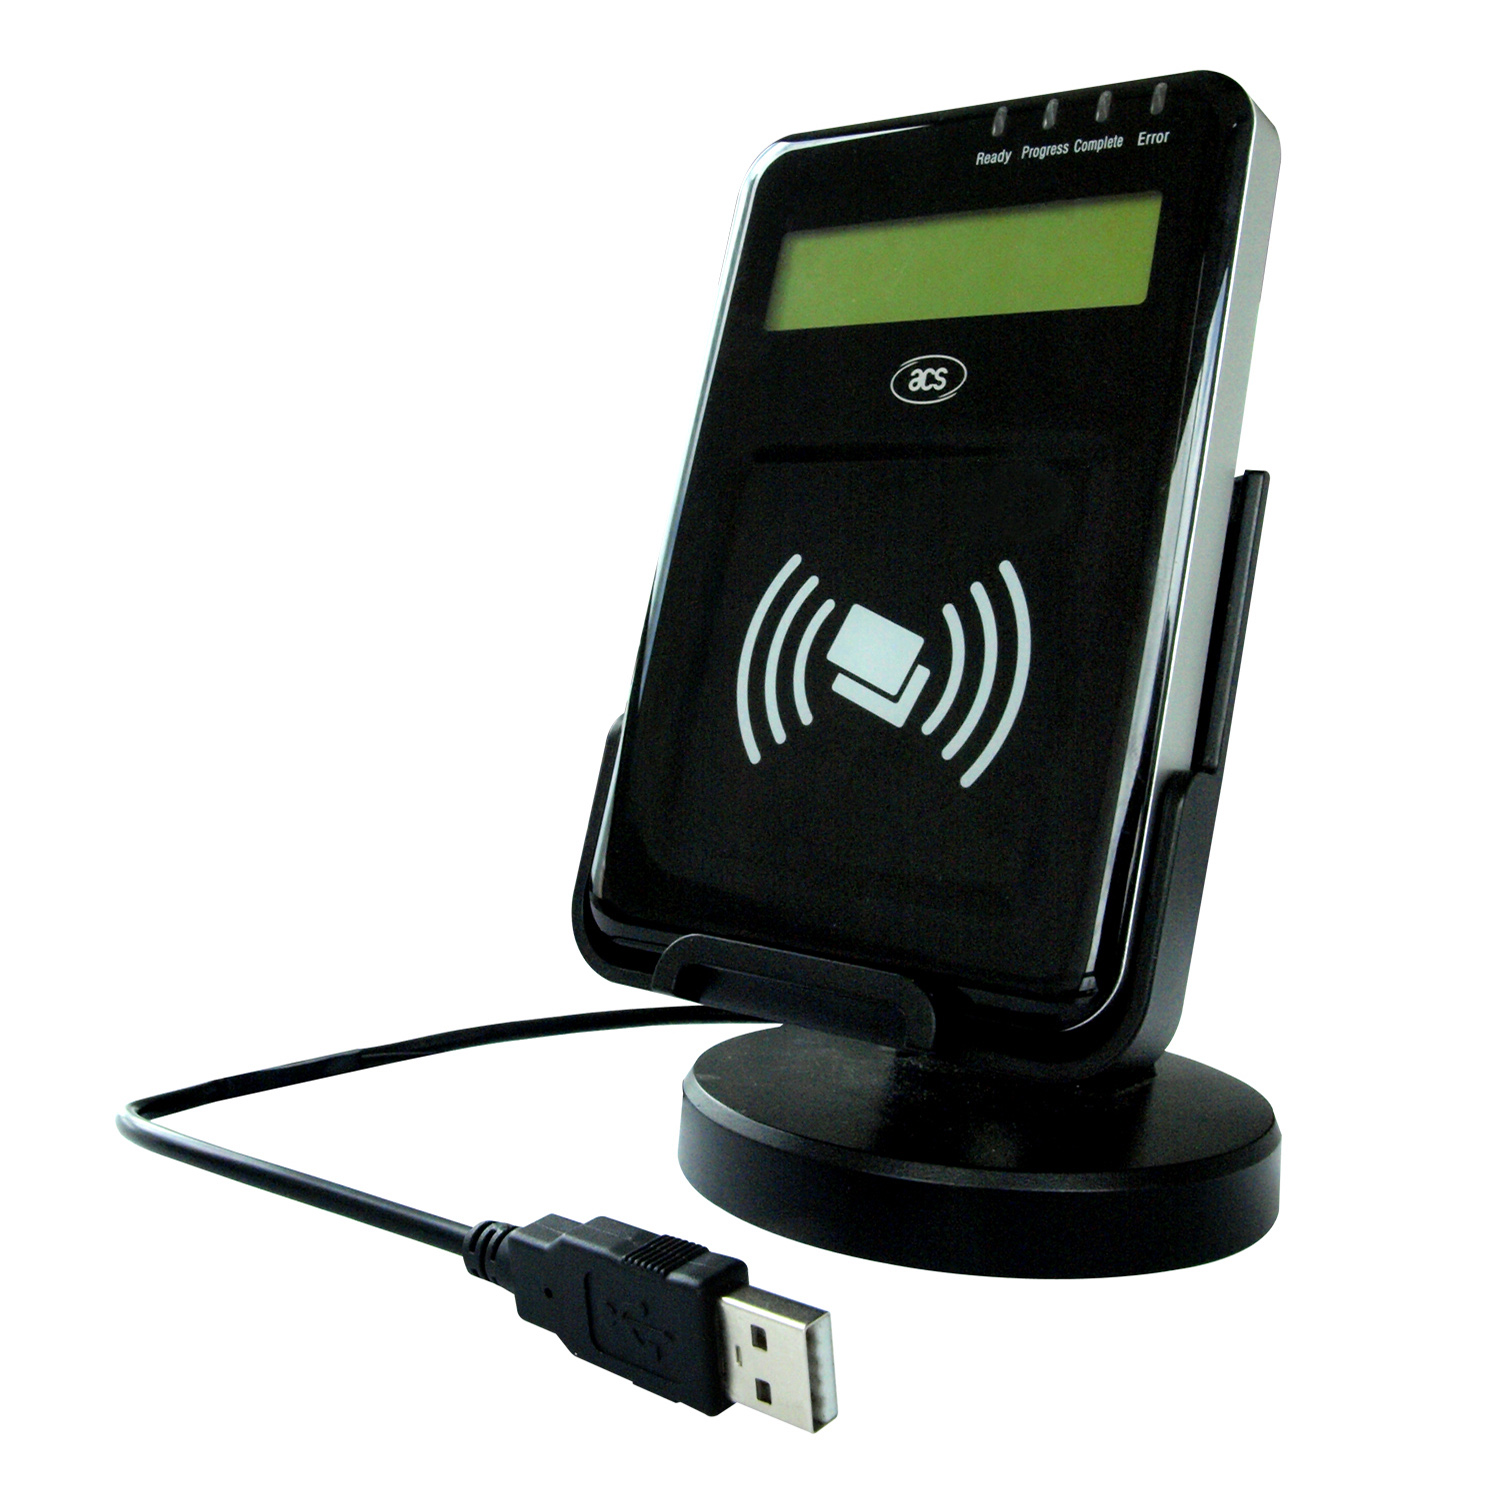 ISO14443 FELICA USB Smart Card NFC Reader With LCD Display ACR1222L